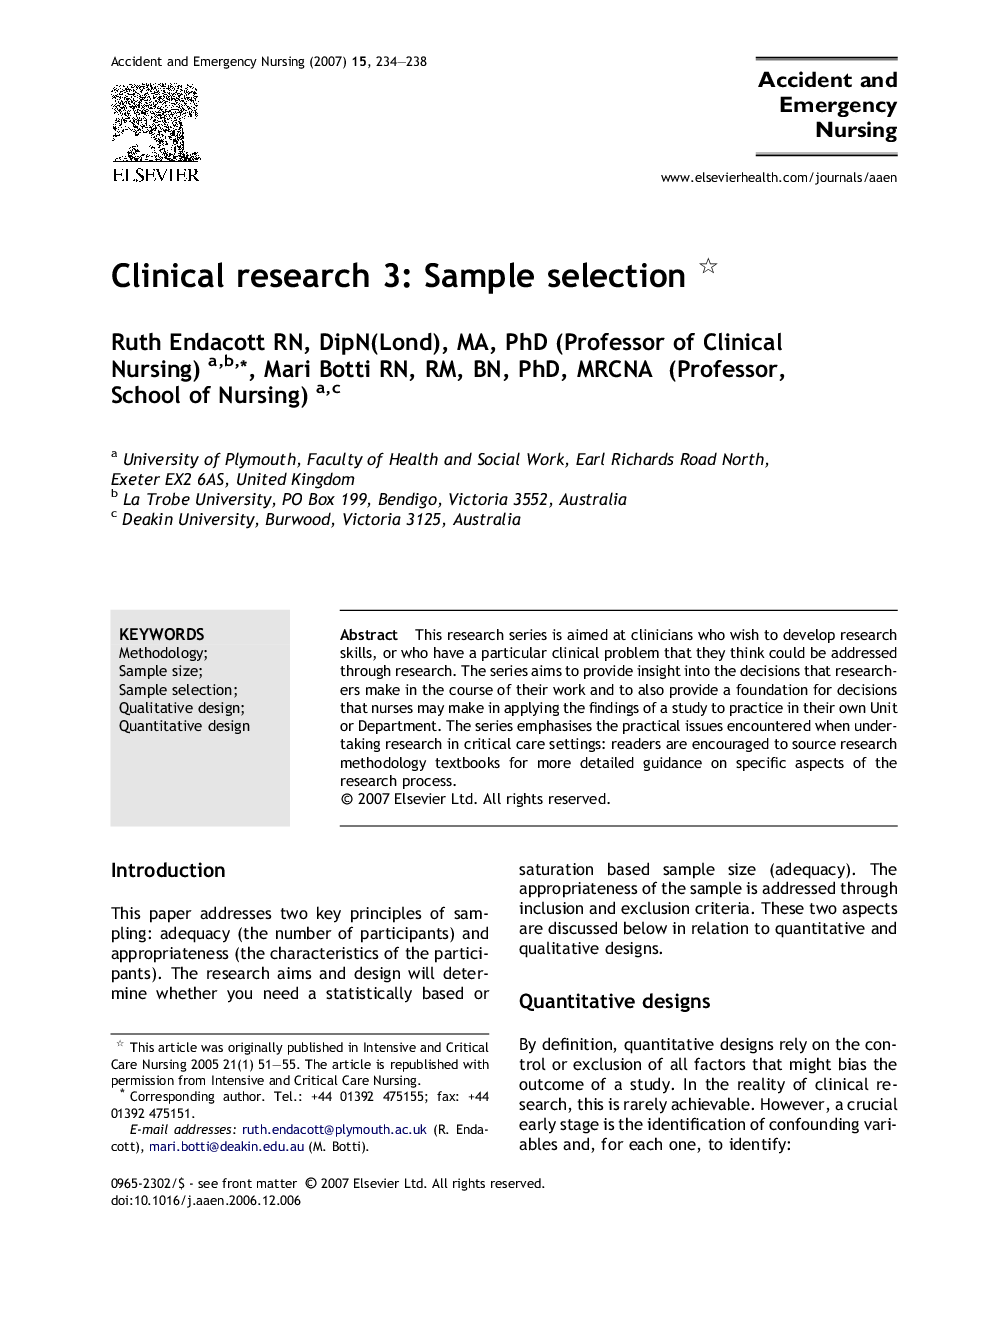 Clinical research 3: Sample selection 